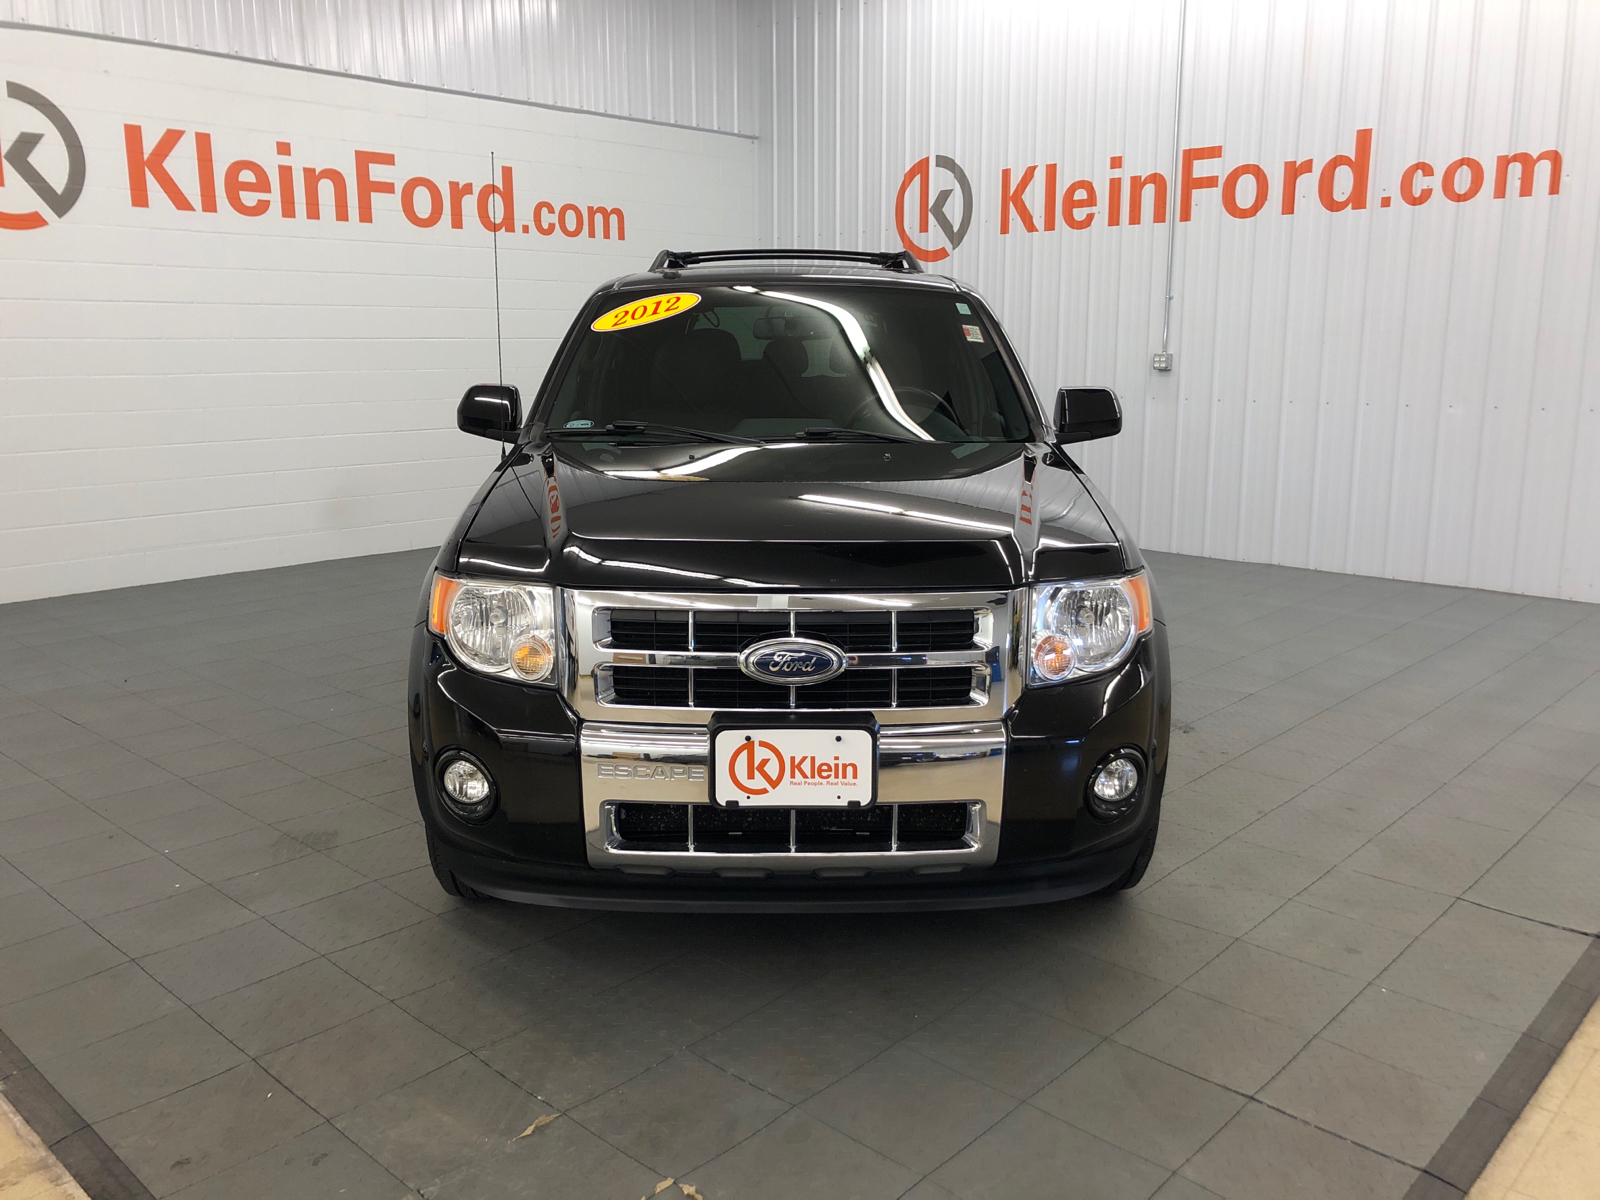 2012 Ford Escape Limited 2